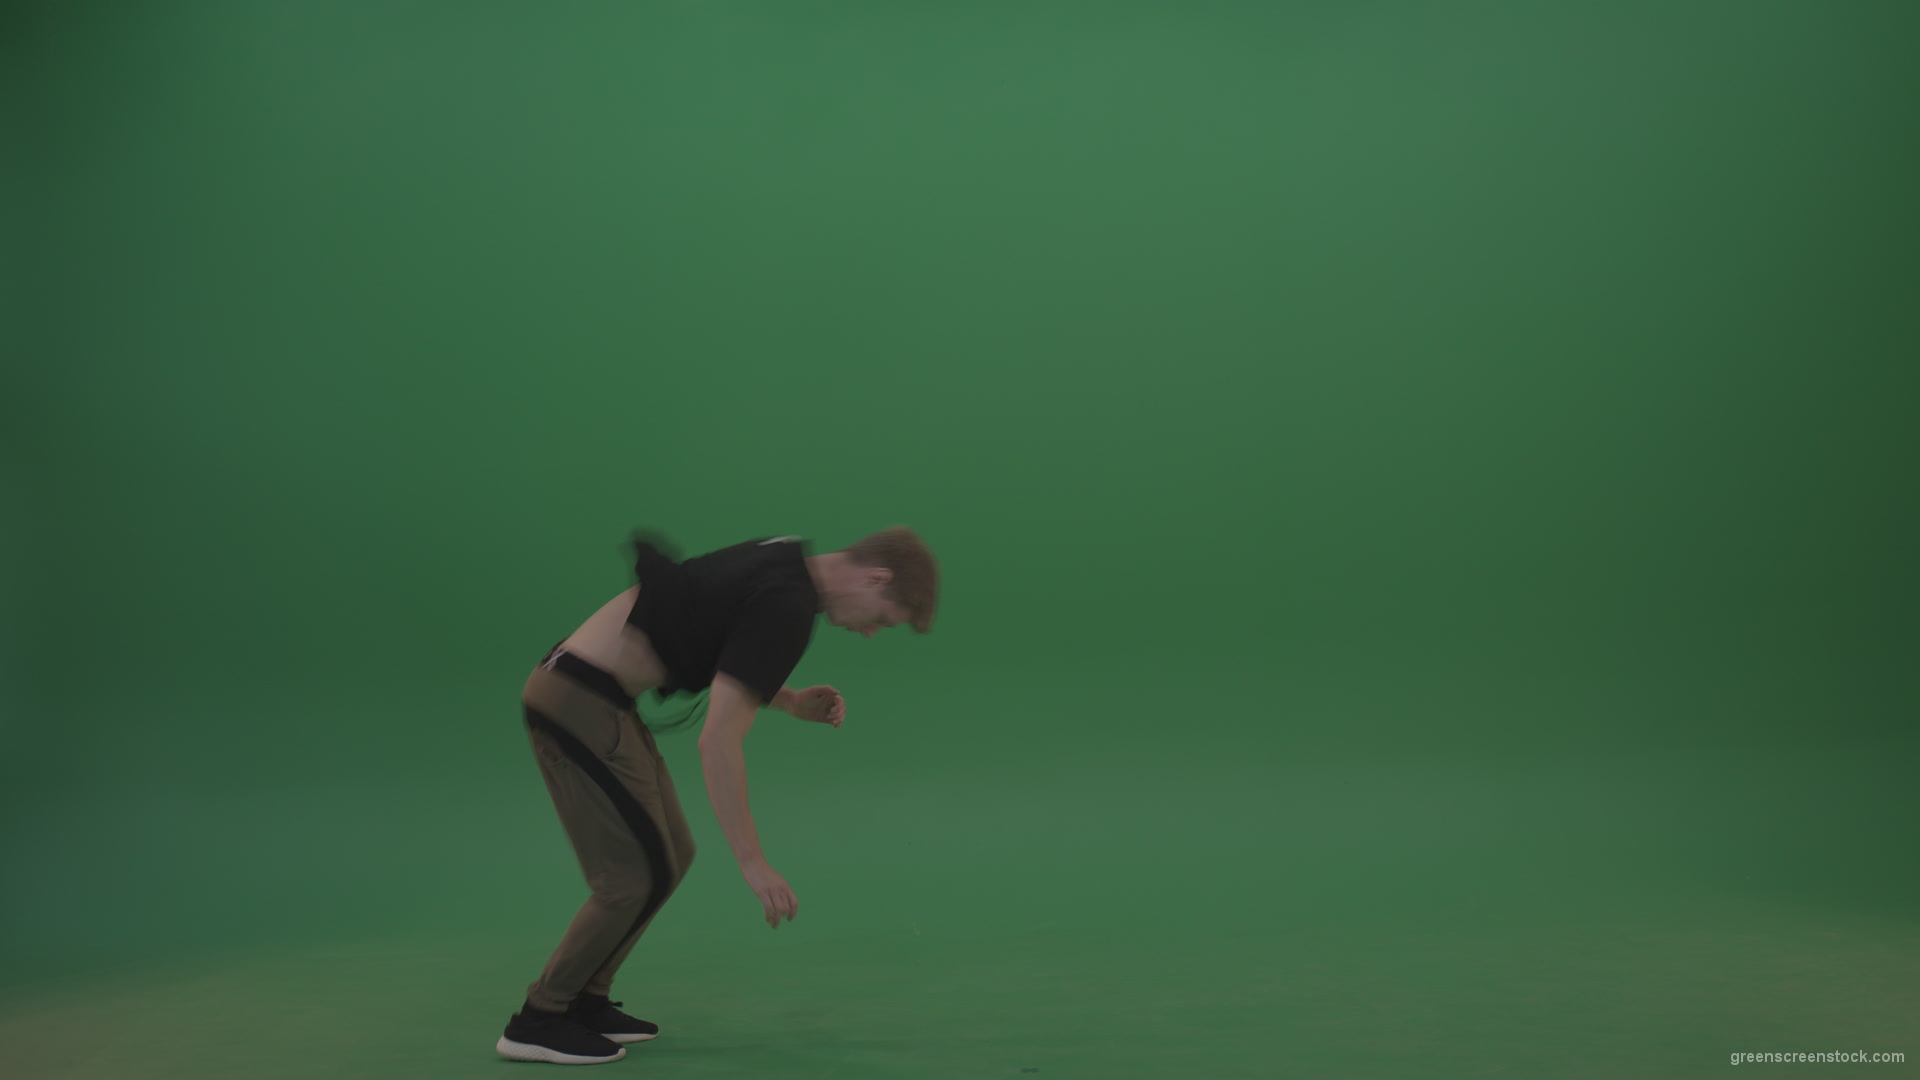 Young_Dangerous_Redhead_Boy_Doing_Icredible_Wheel_And_Back_Flip_Freerun_Parkour_Moves_On_Green_Screen_Wall_Background_008 Green Screen Stock